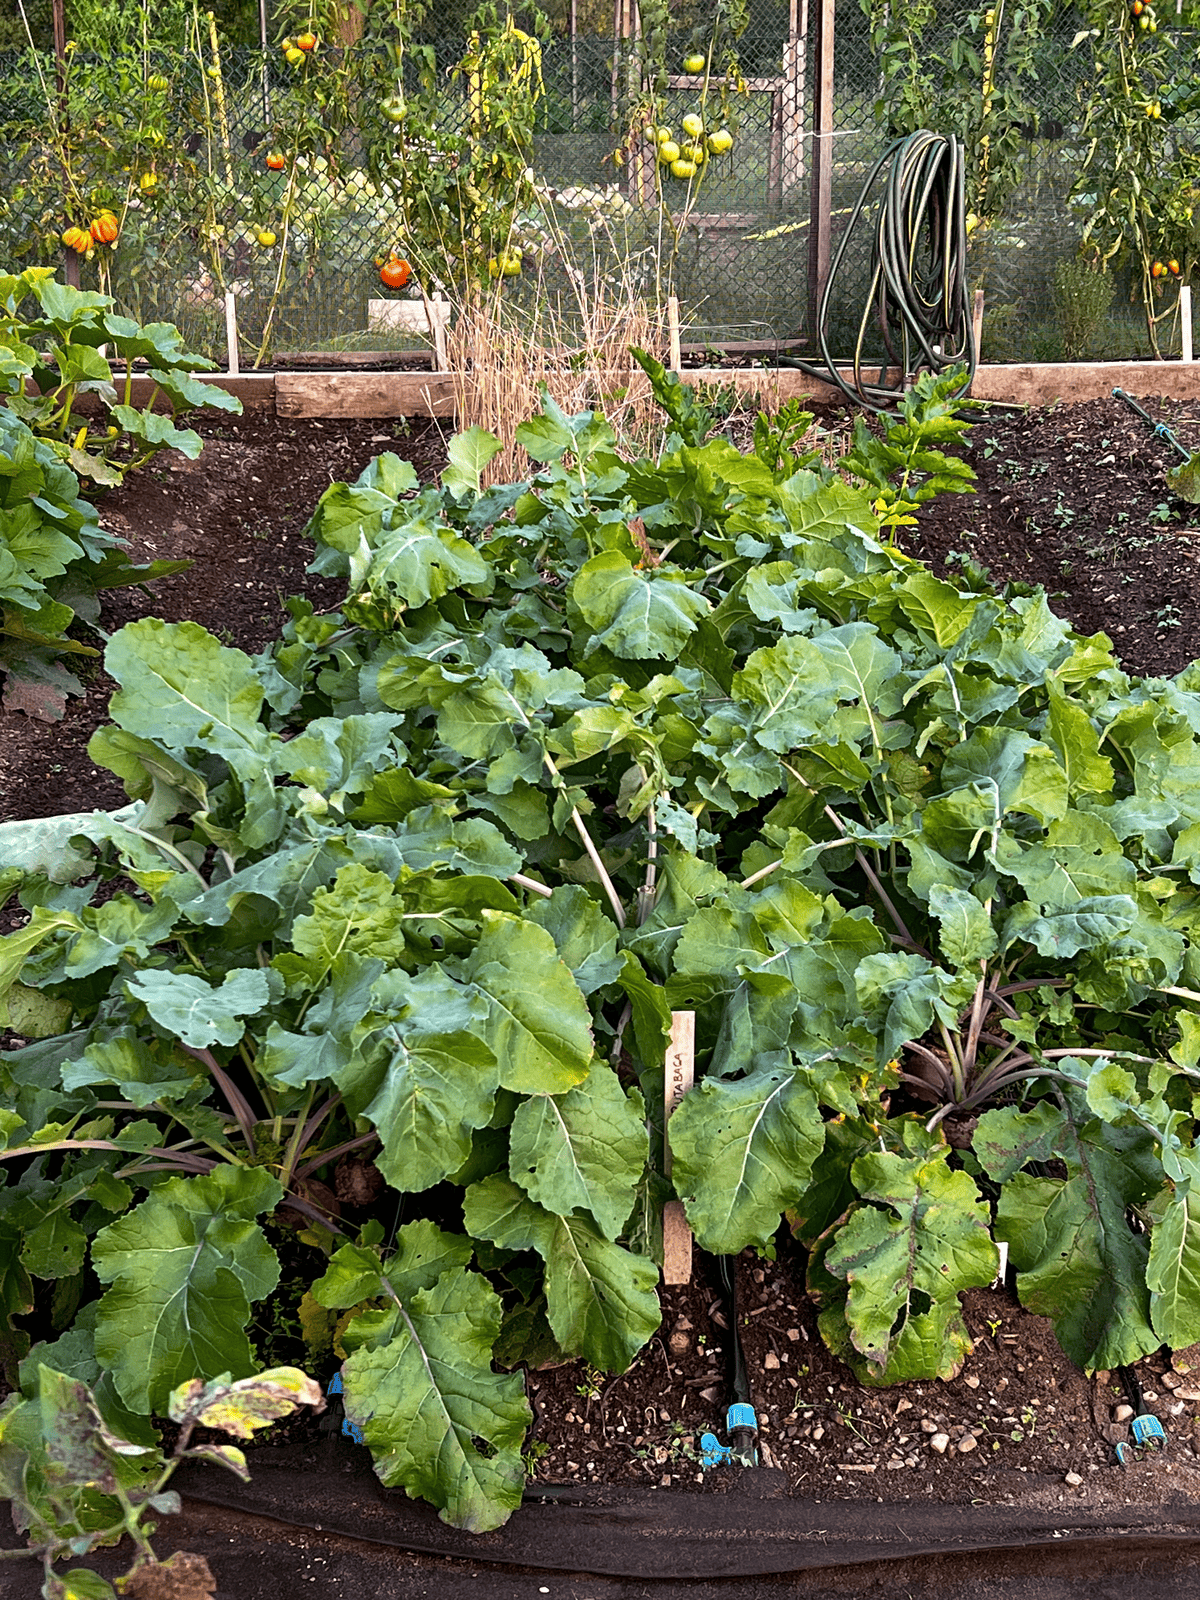 Rutabaga, a cross between cabbage and turnip grows huge leaves in the garden.